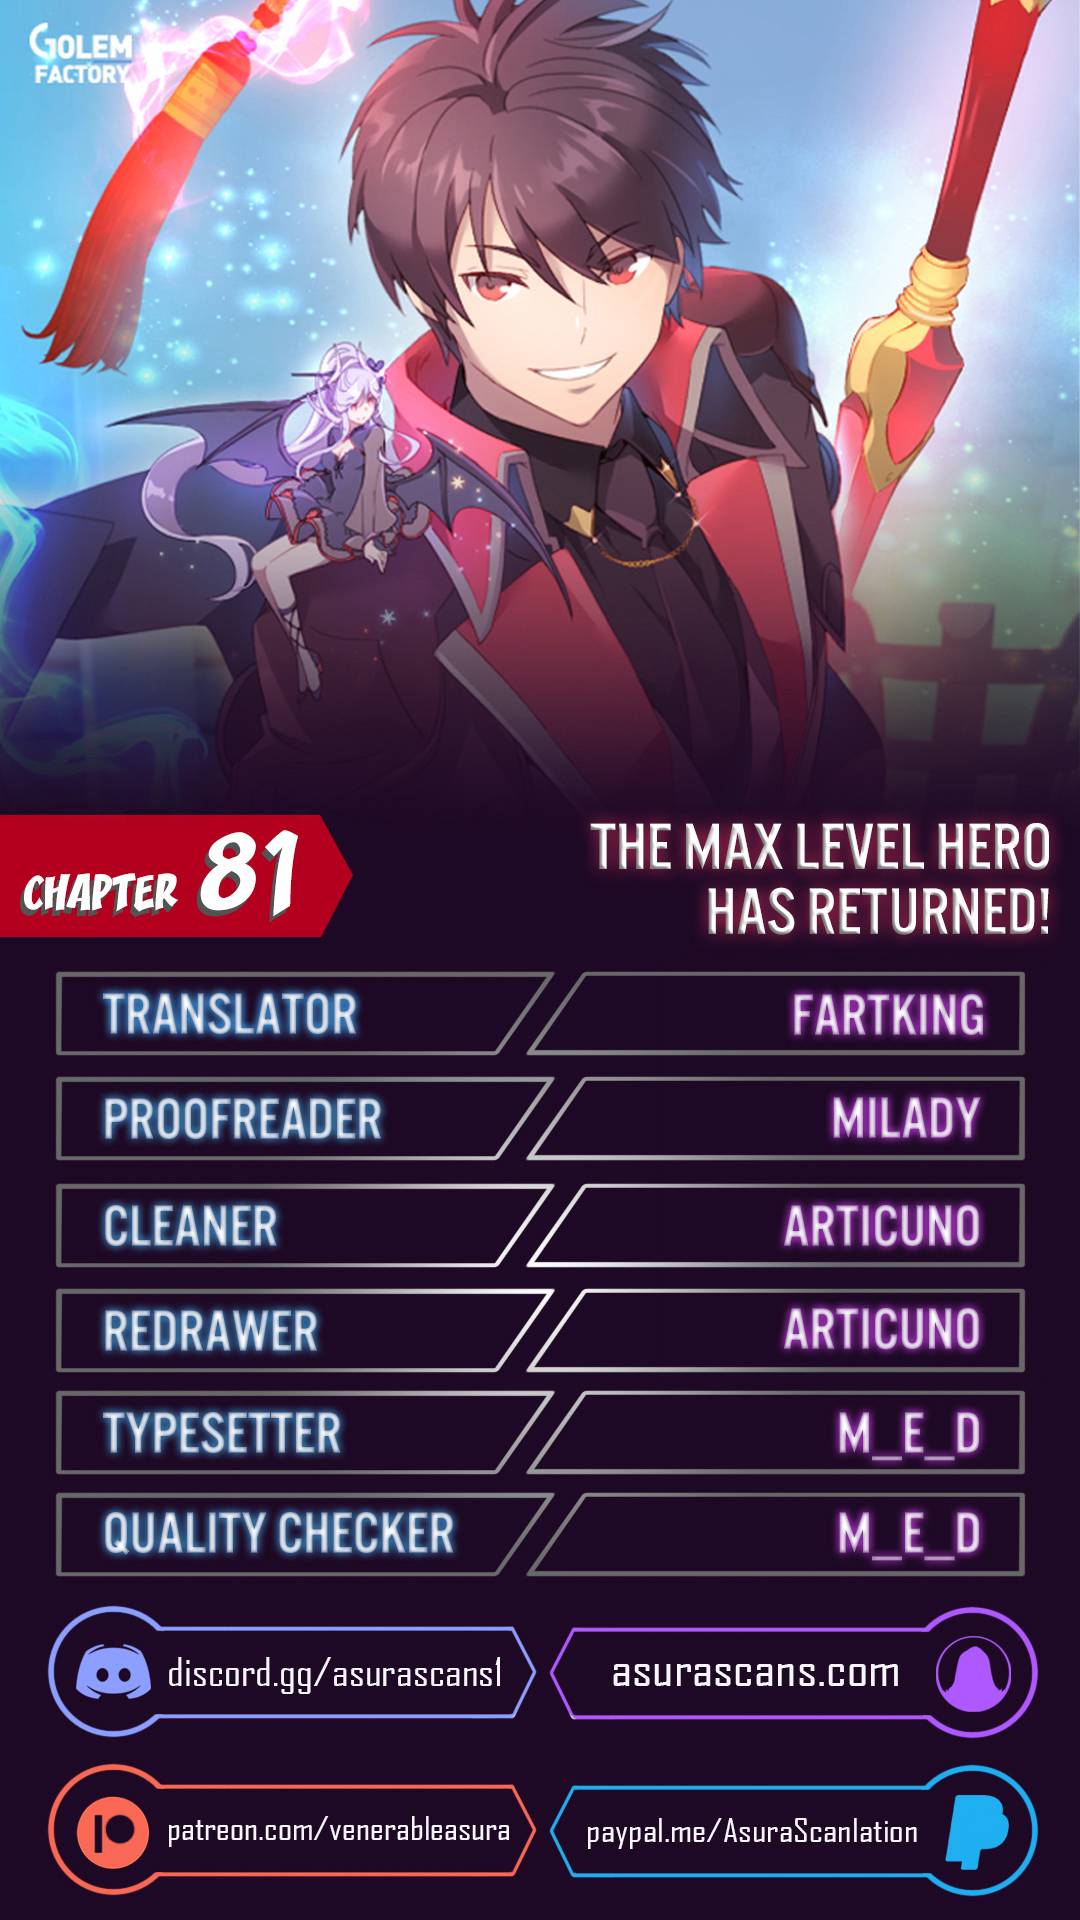 The MAX leveled hero will return! Chapter 81